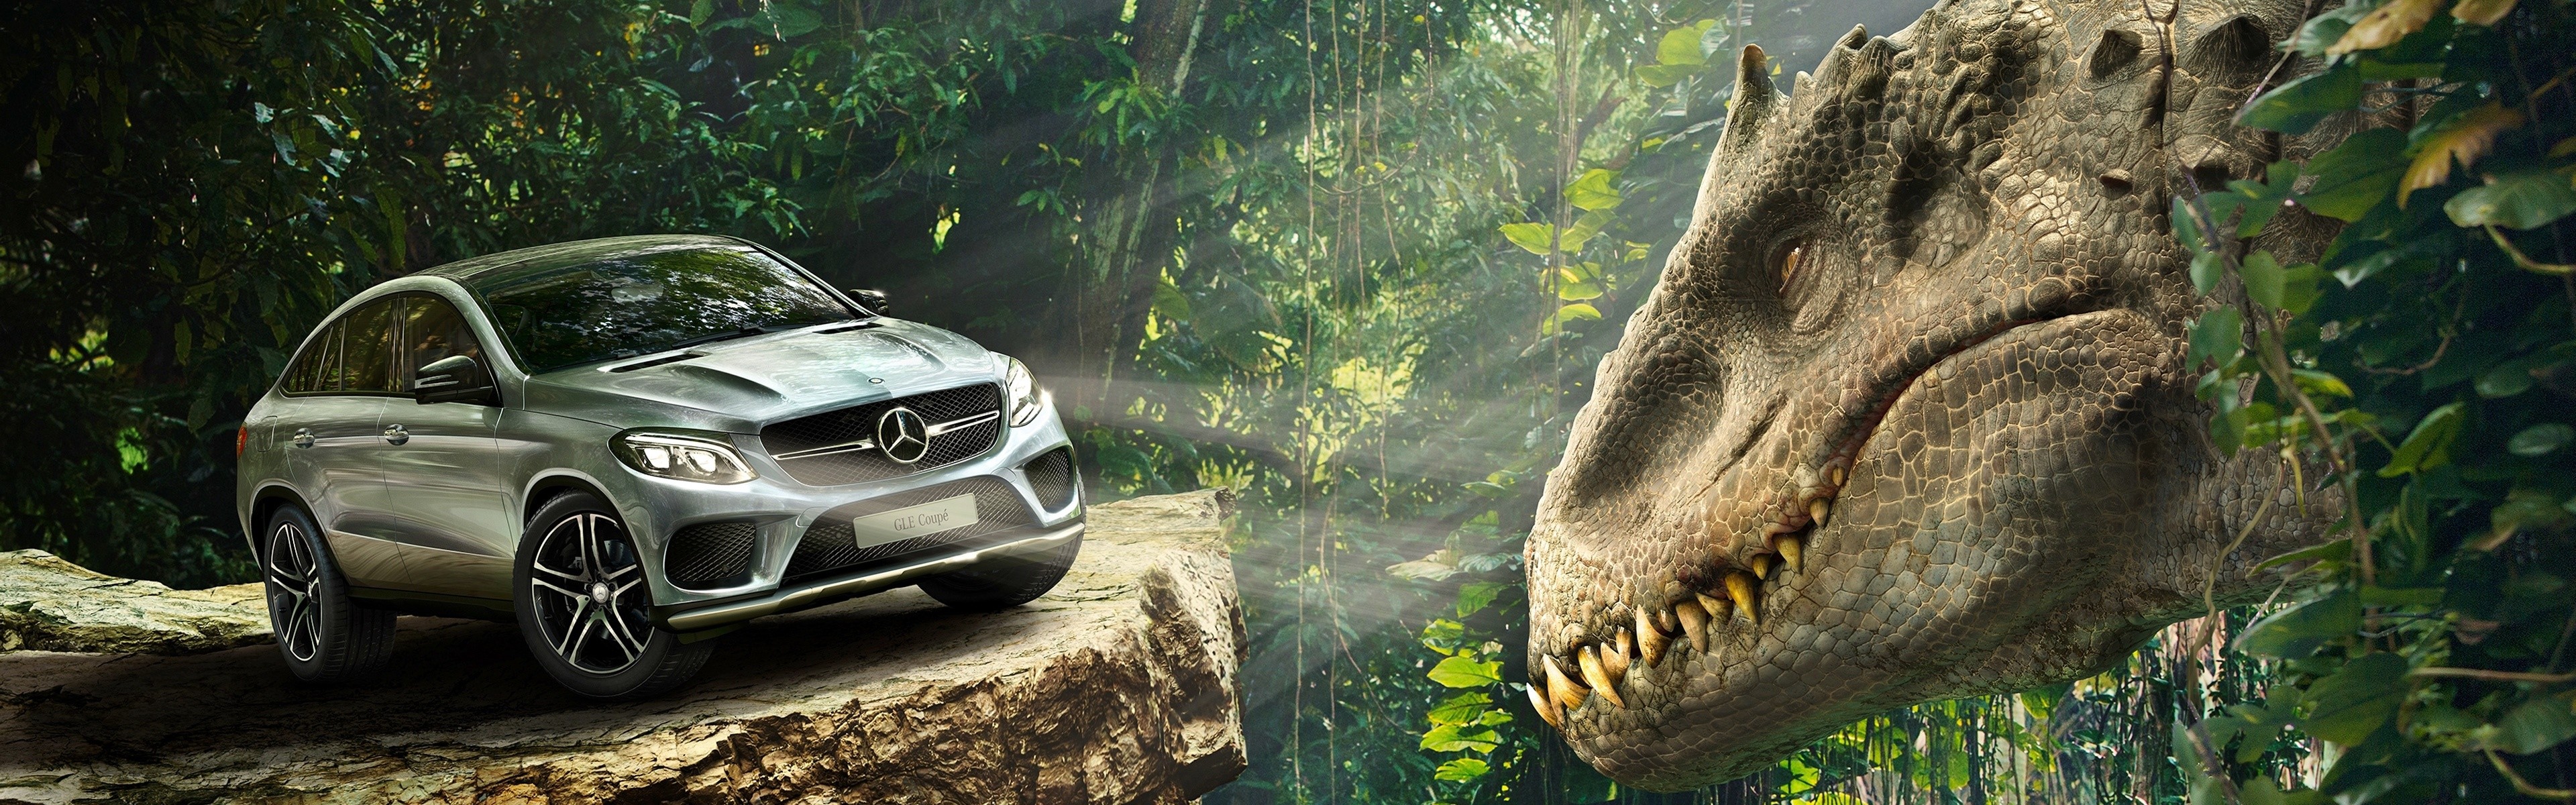 3840x1200 Mercedes Benz GLE Coupe Jurassic World Wallpapers